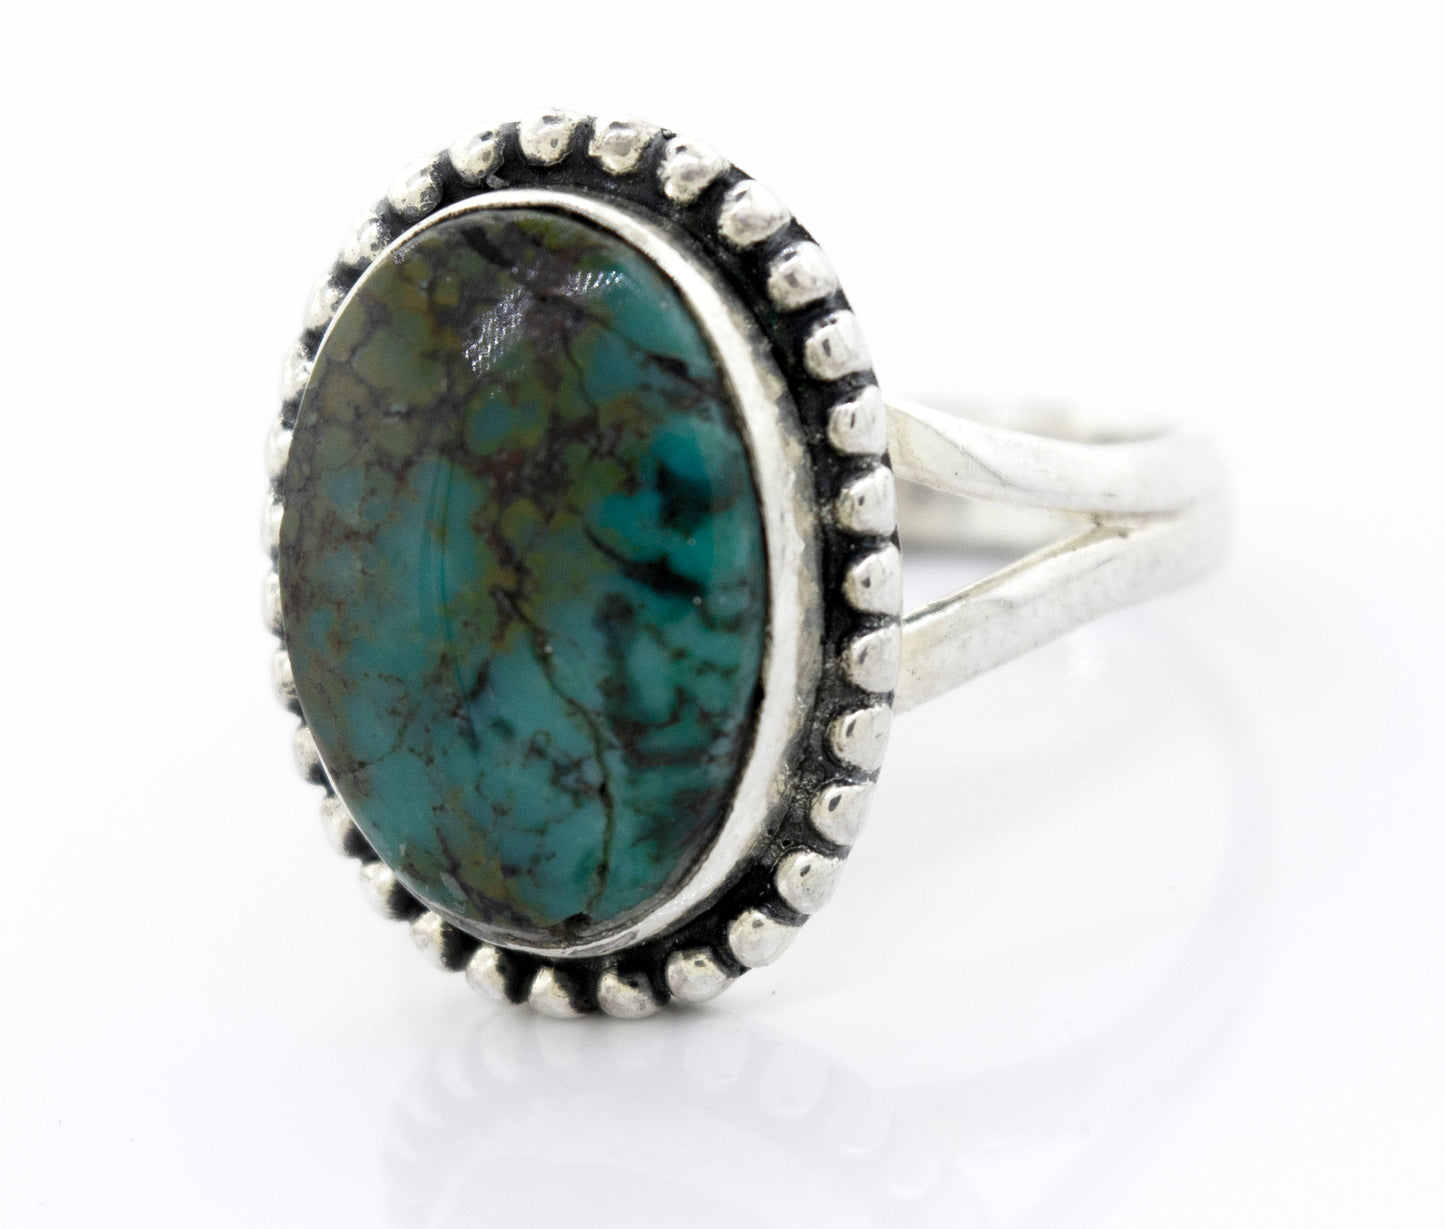 A Super Silver oval natural turquoise ring with a ball border.